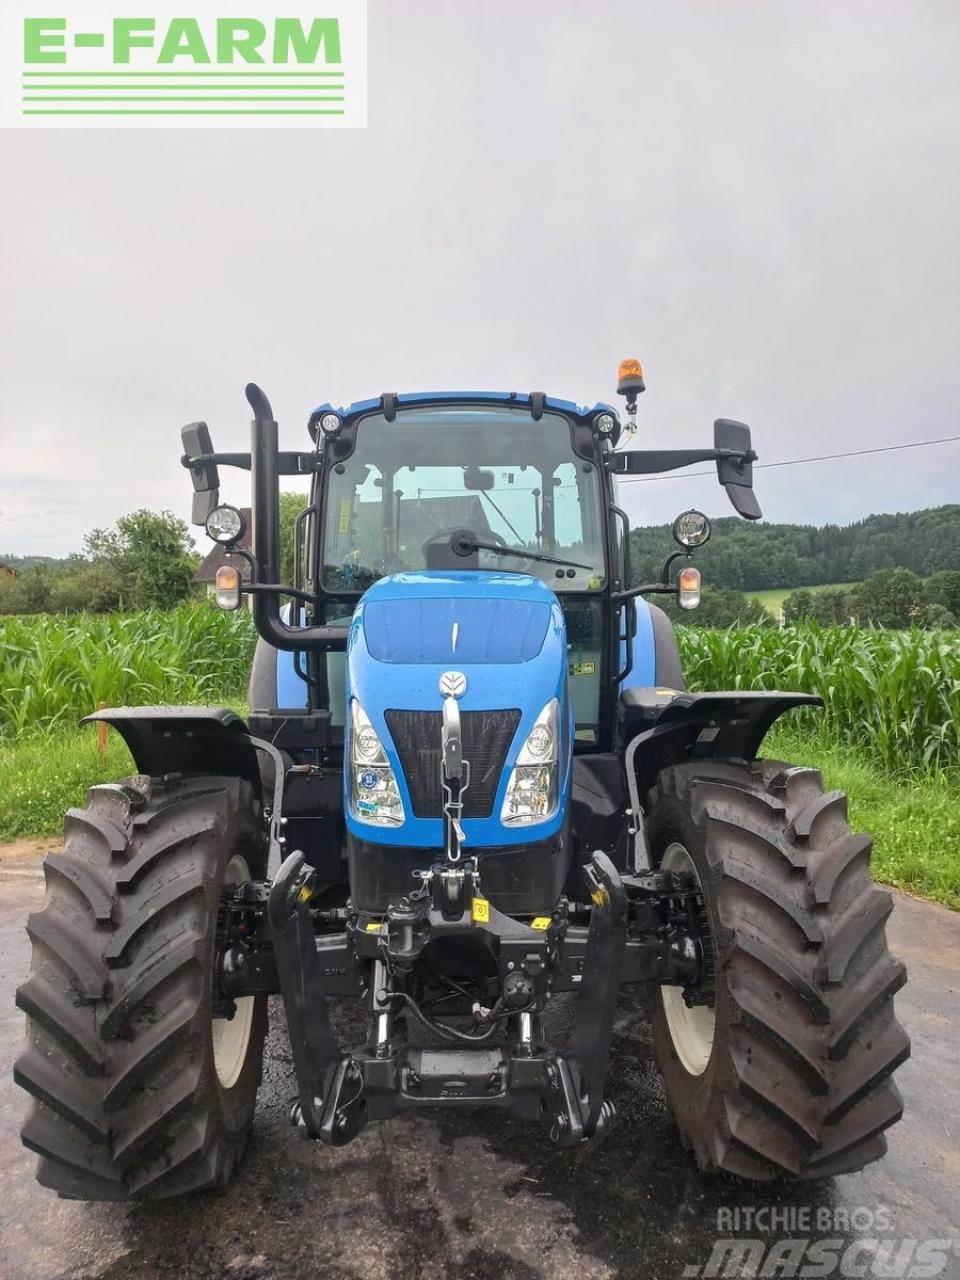 New Holland t5.100 powershuttle Tratores Agrícolas usados